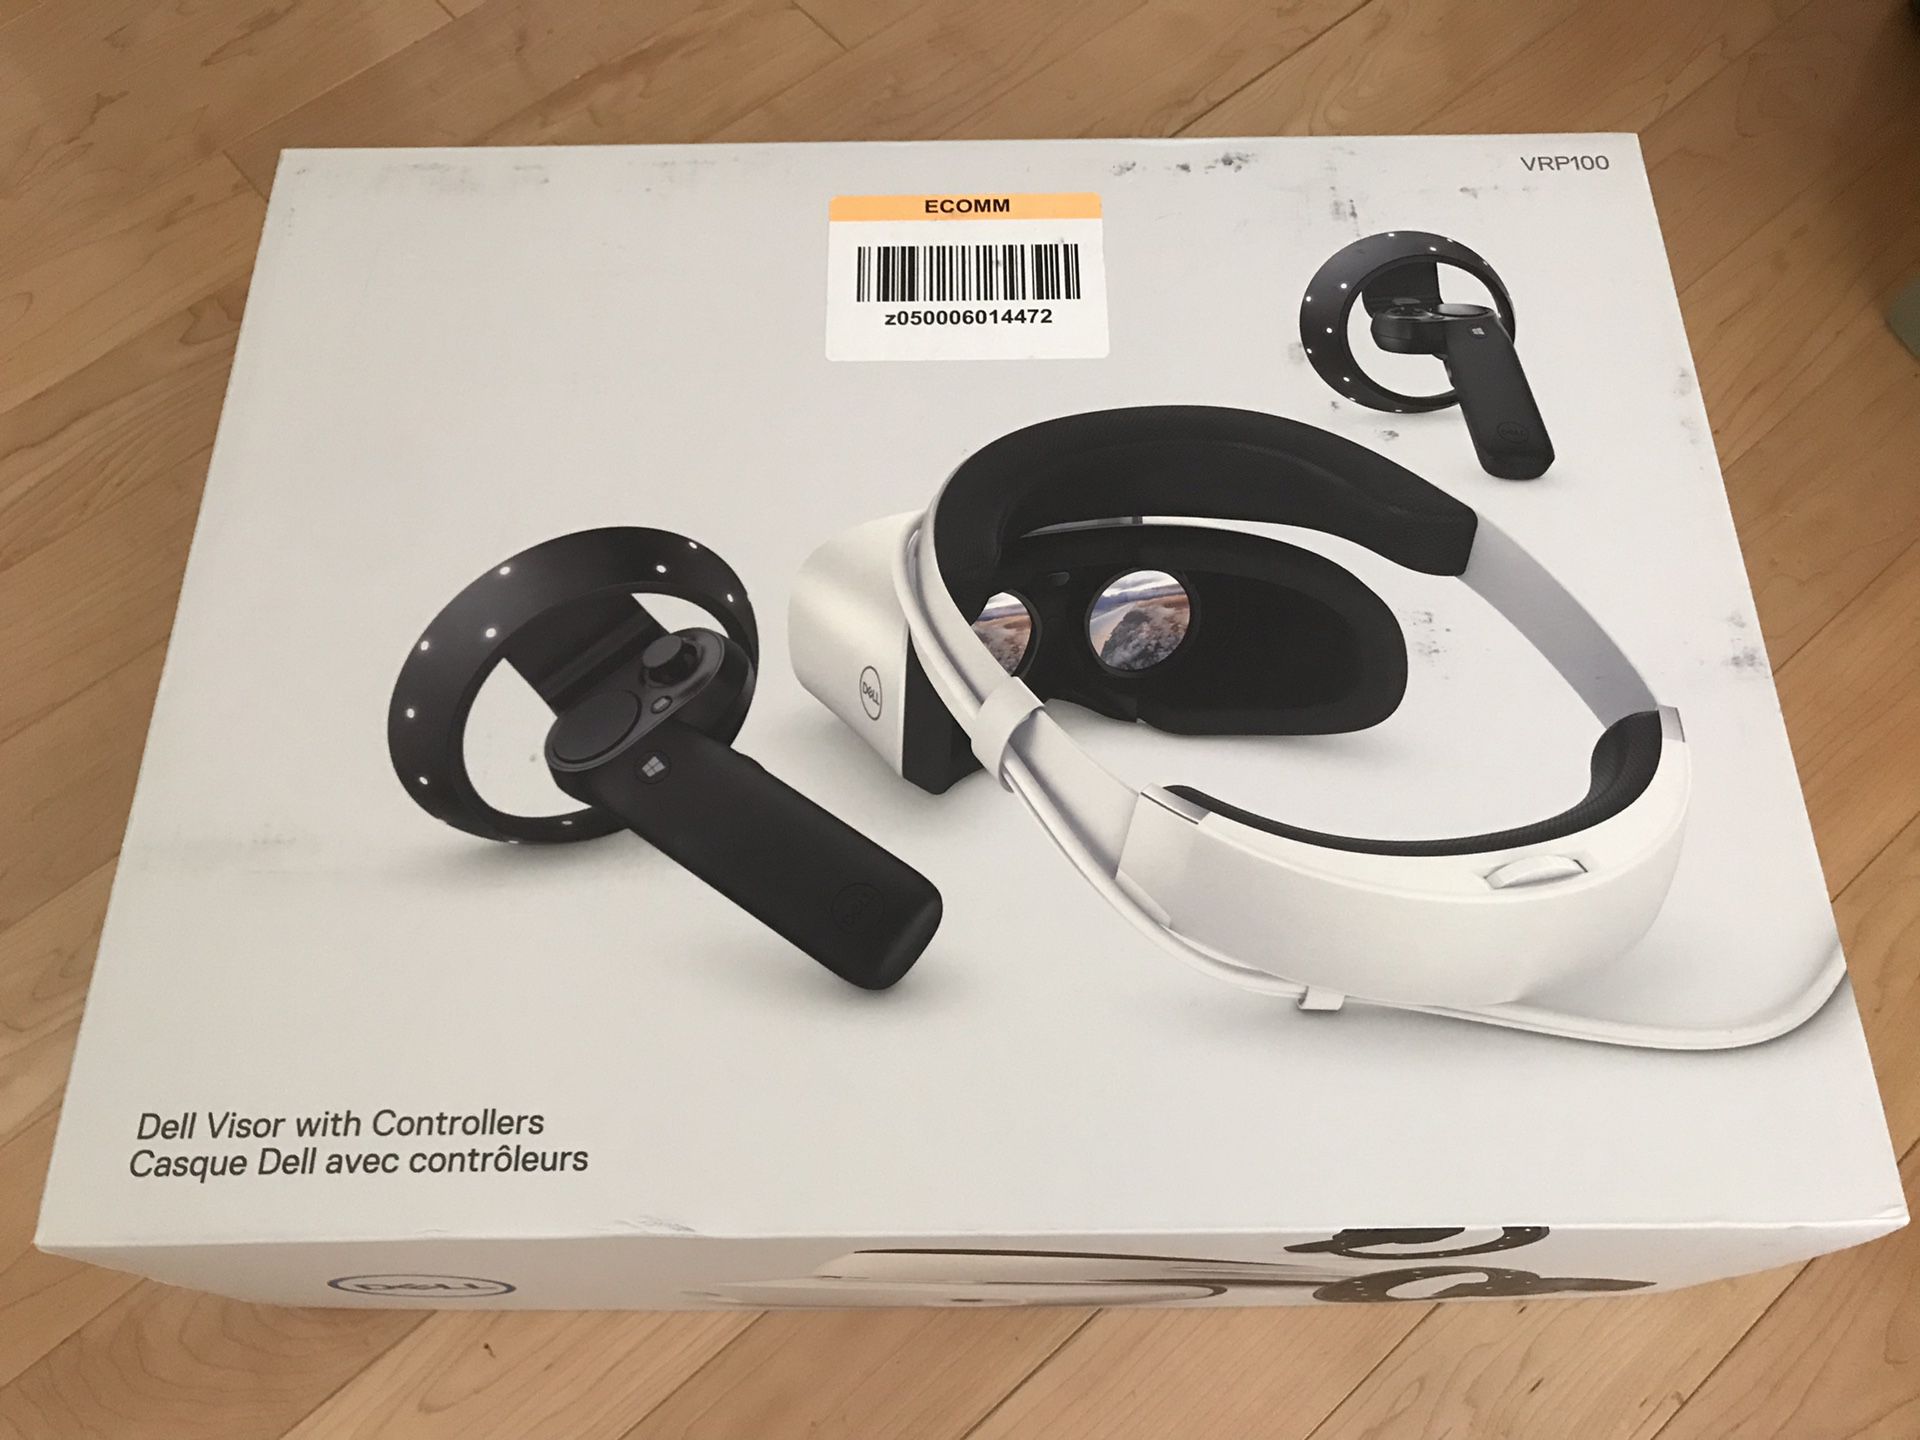 [40% OFF] VR Headset - Dell Visor with Controllers (VRP100)